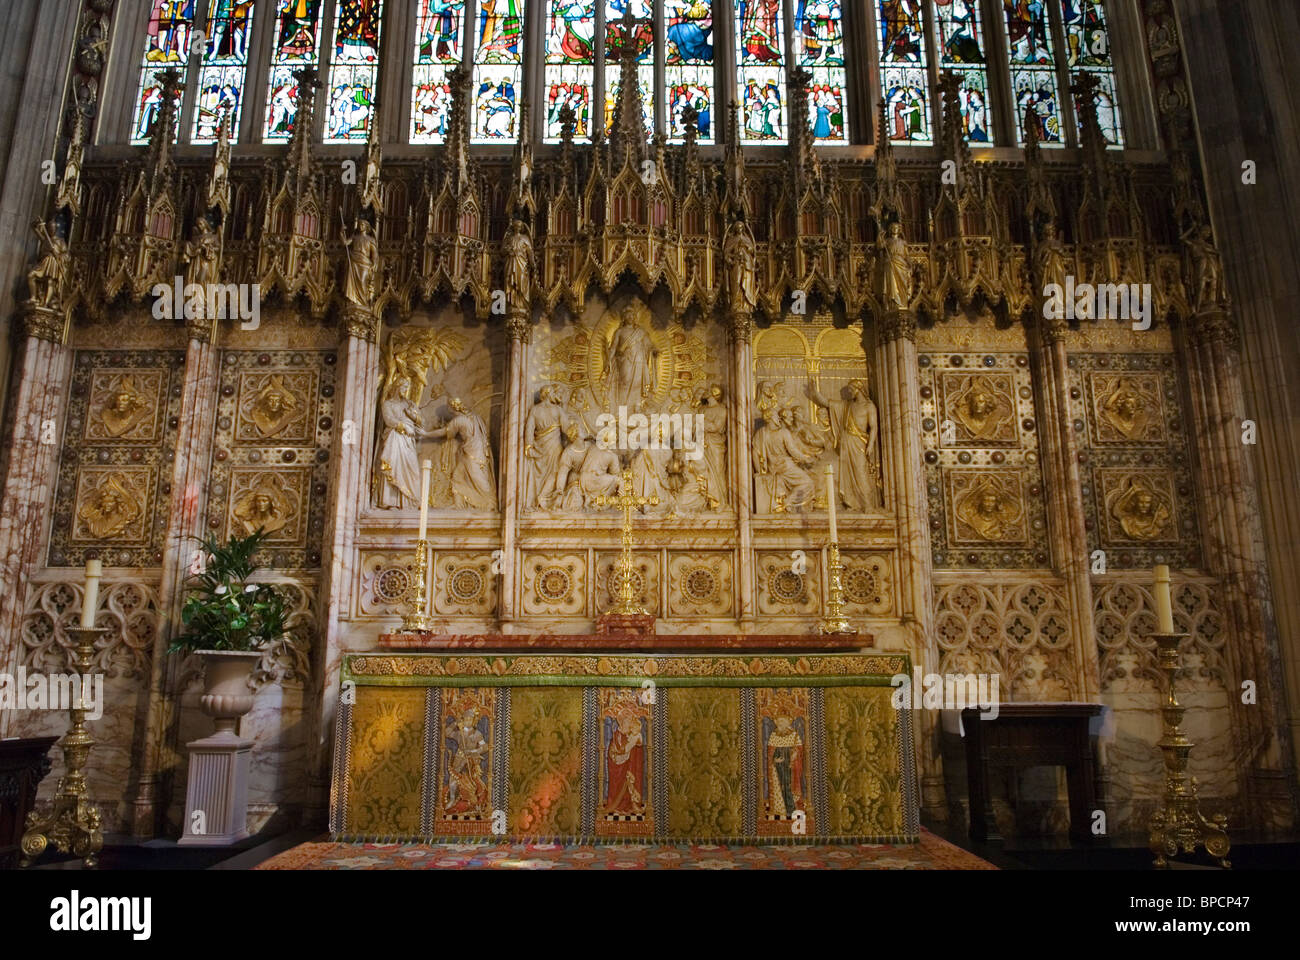 St Georges Chapel Windsor Castle Interior alter and stained glass windows of  Berkshire England.  HOMER SYKES Stock Photo